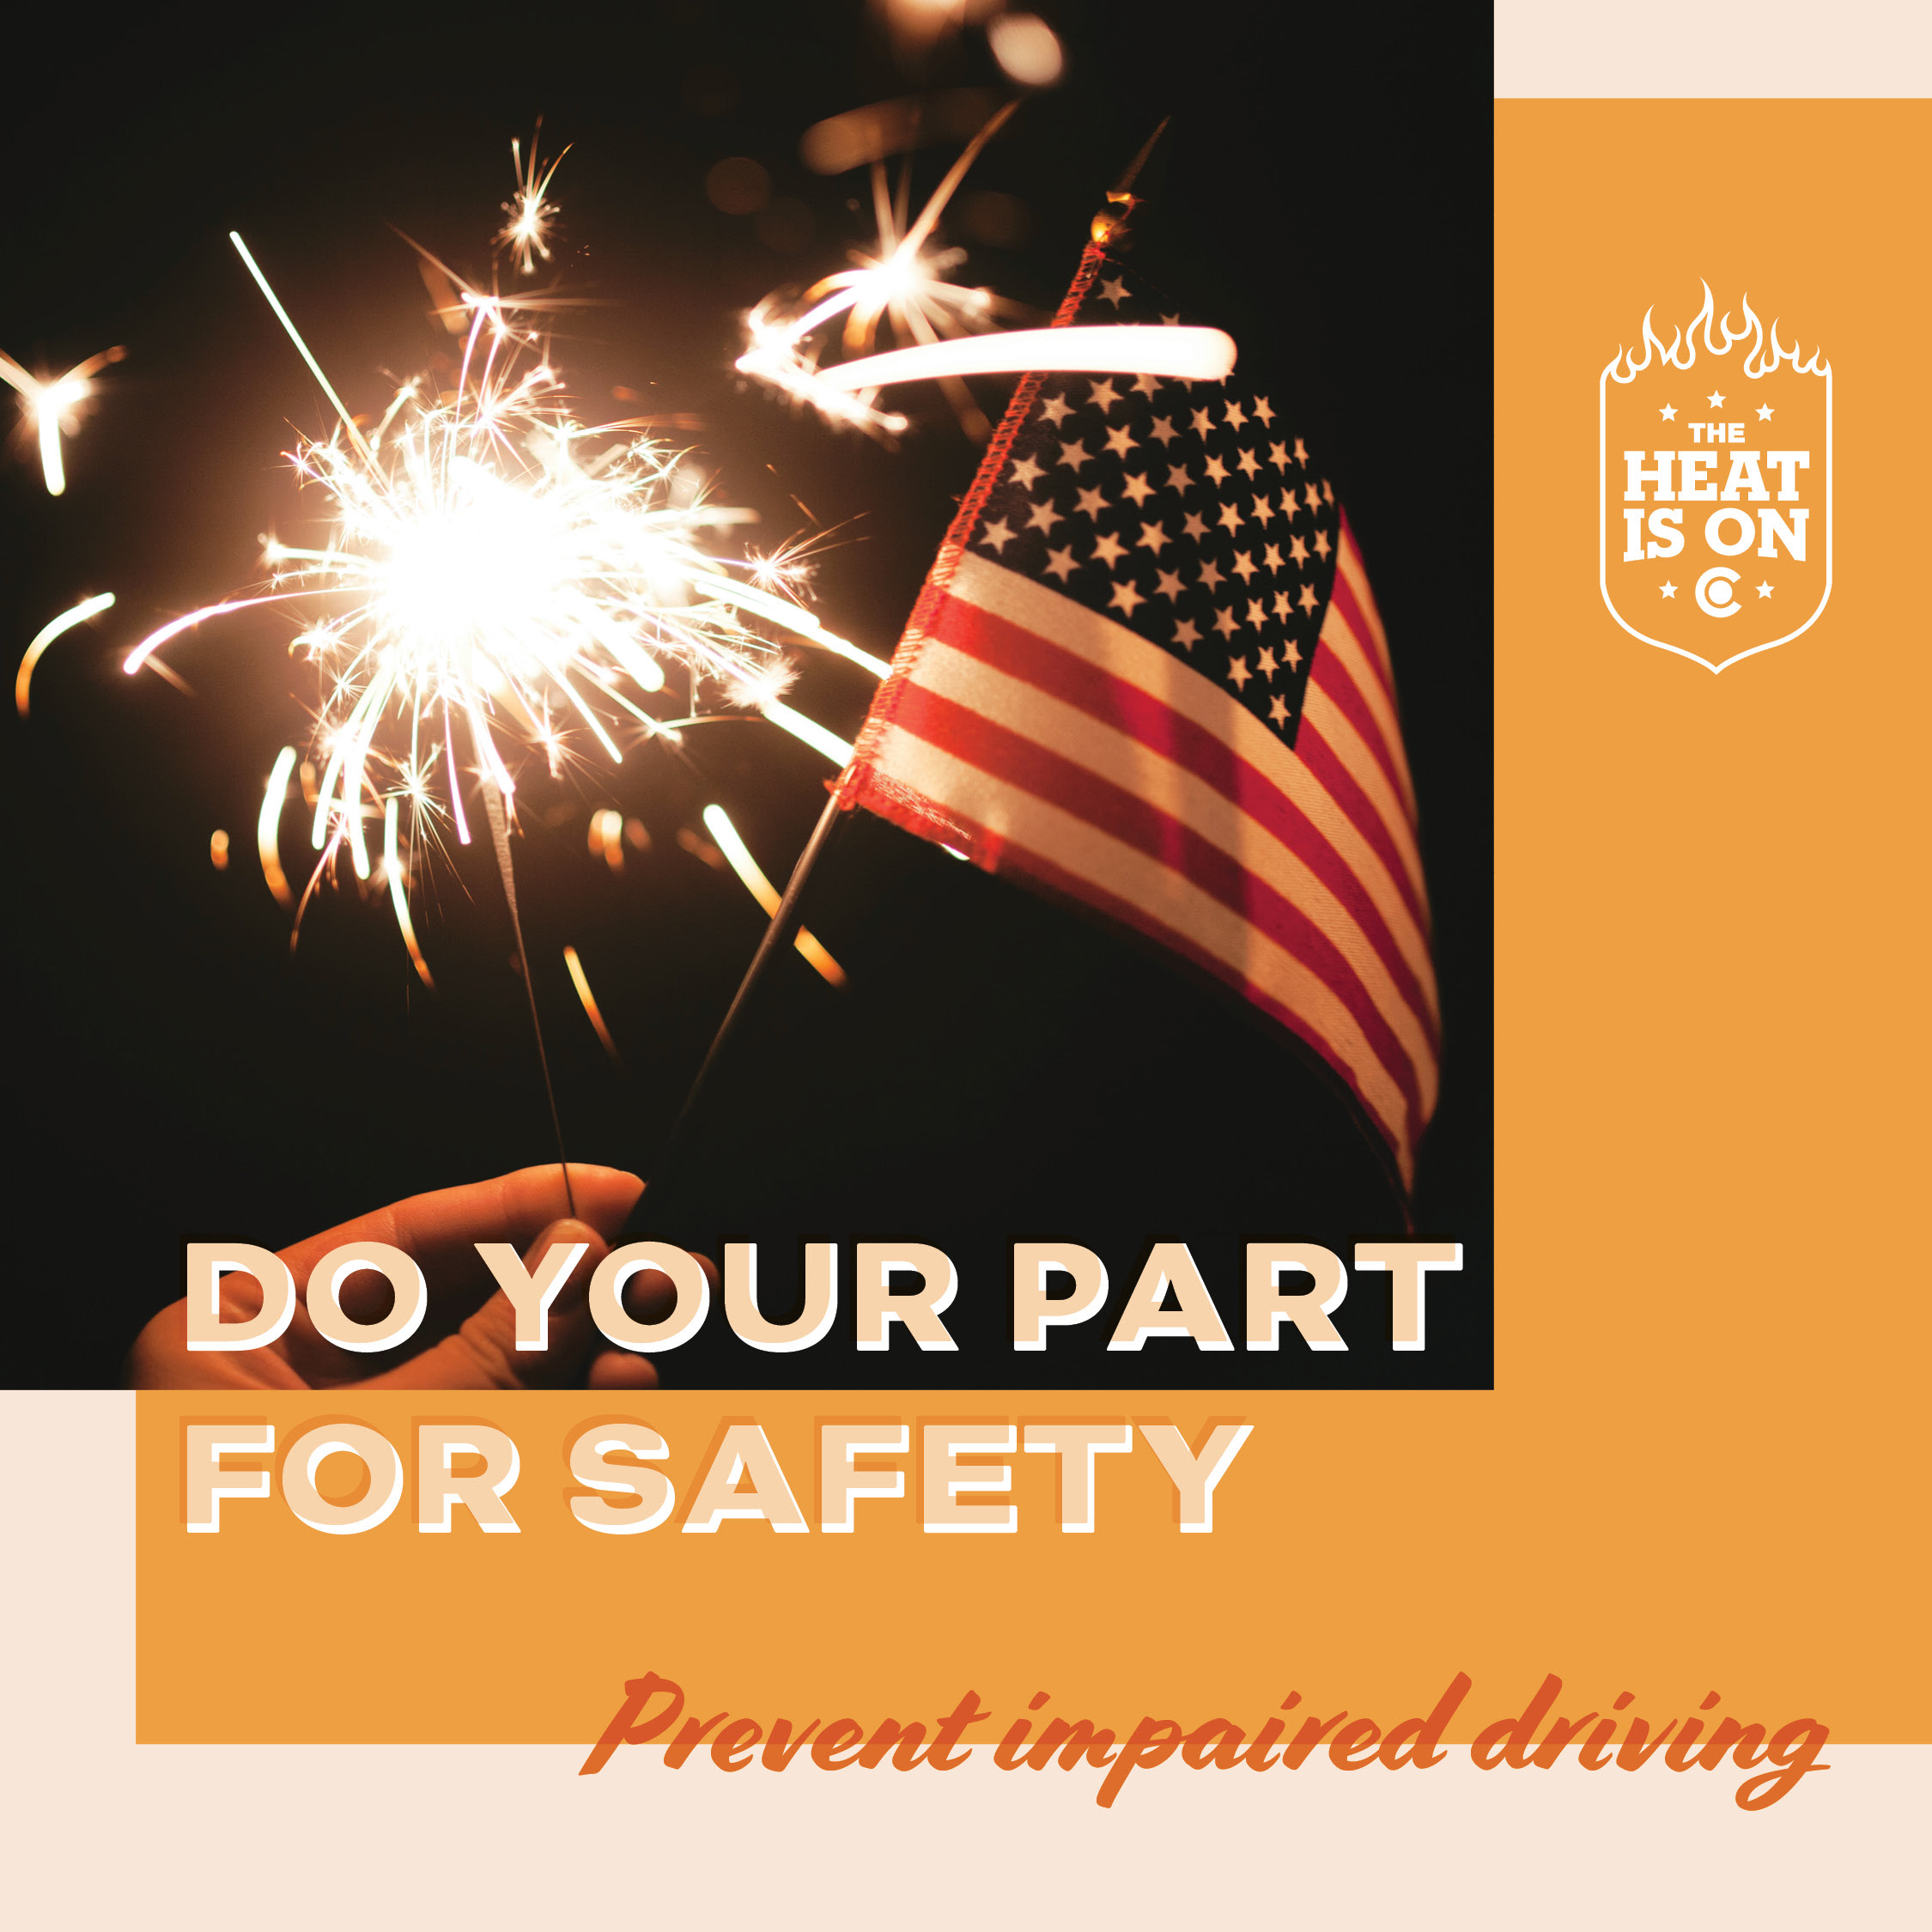 Prevent impaired driving graphic.jpg detail image